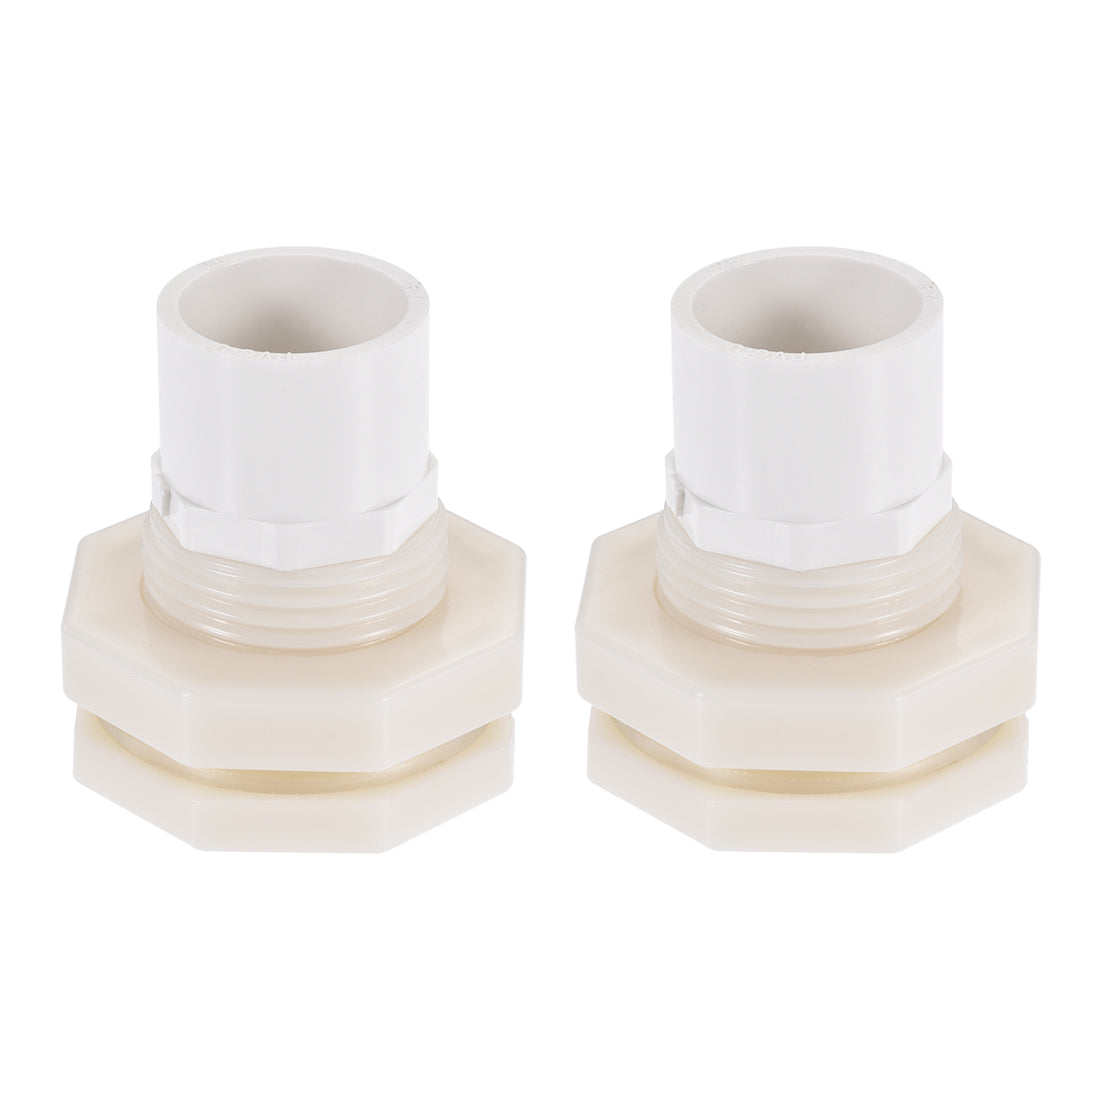 uxcell Uxcell Bulkhead Fitting, G3/4 Female 1.38" Male, Tube Adaptor Fitting, with Silicone Gasket and Pipe Connector, for Water Tanks, PVC, White, Pack of 2